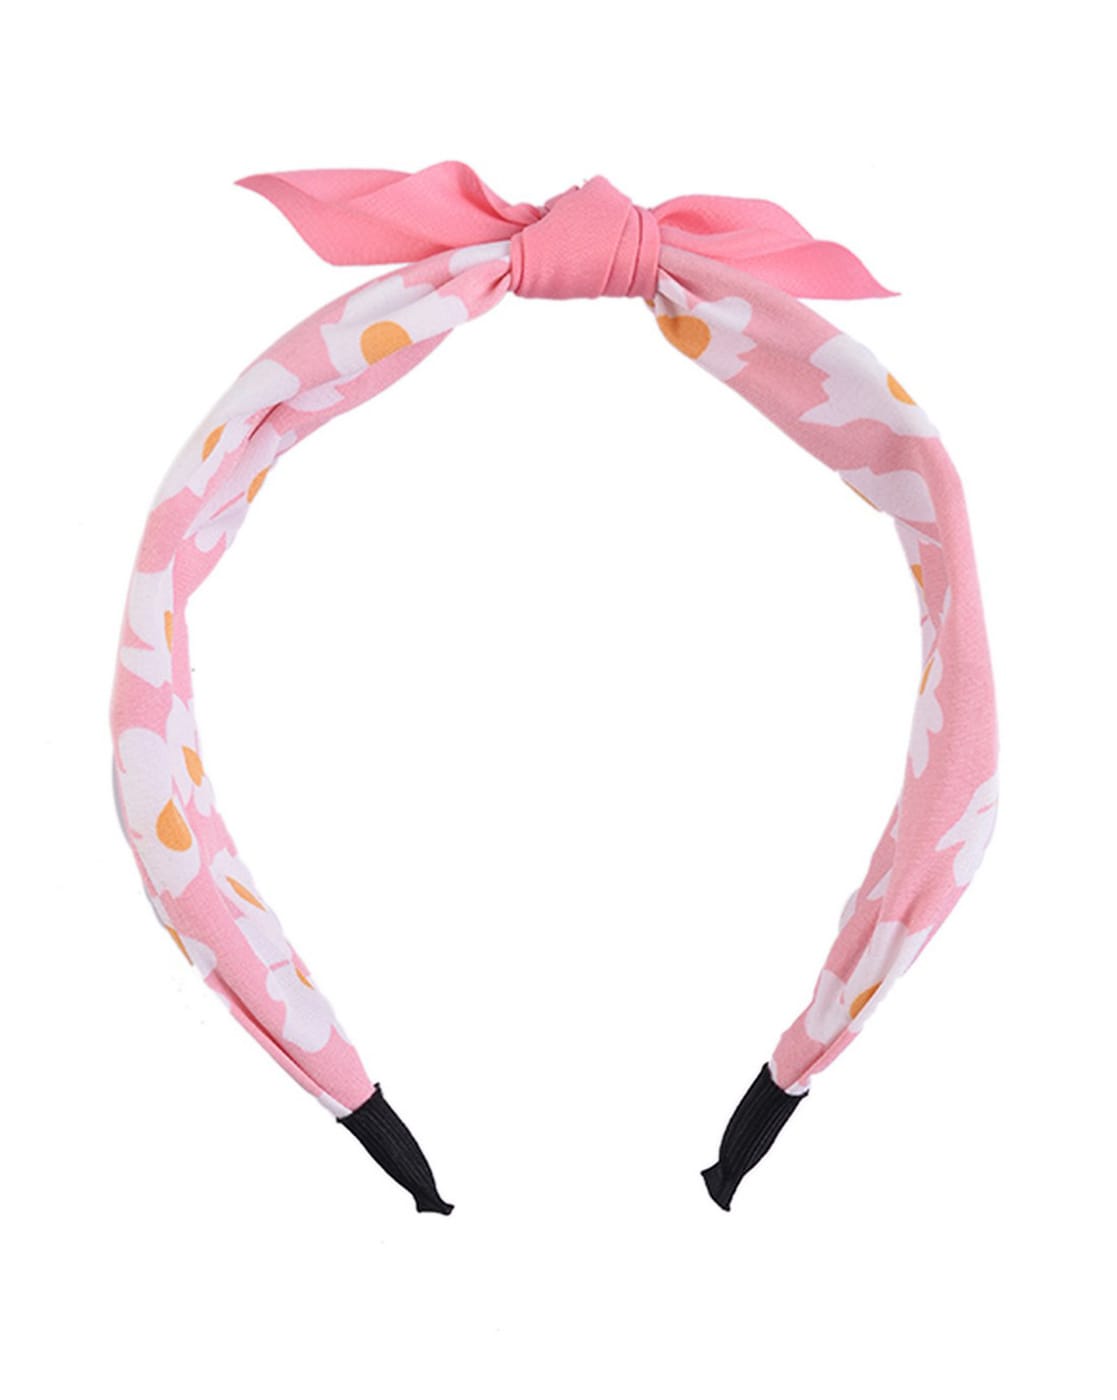 Buy Online Pretty Red Hair Band for Cute Girls with Flowers